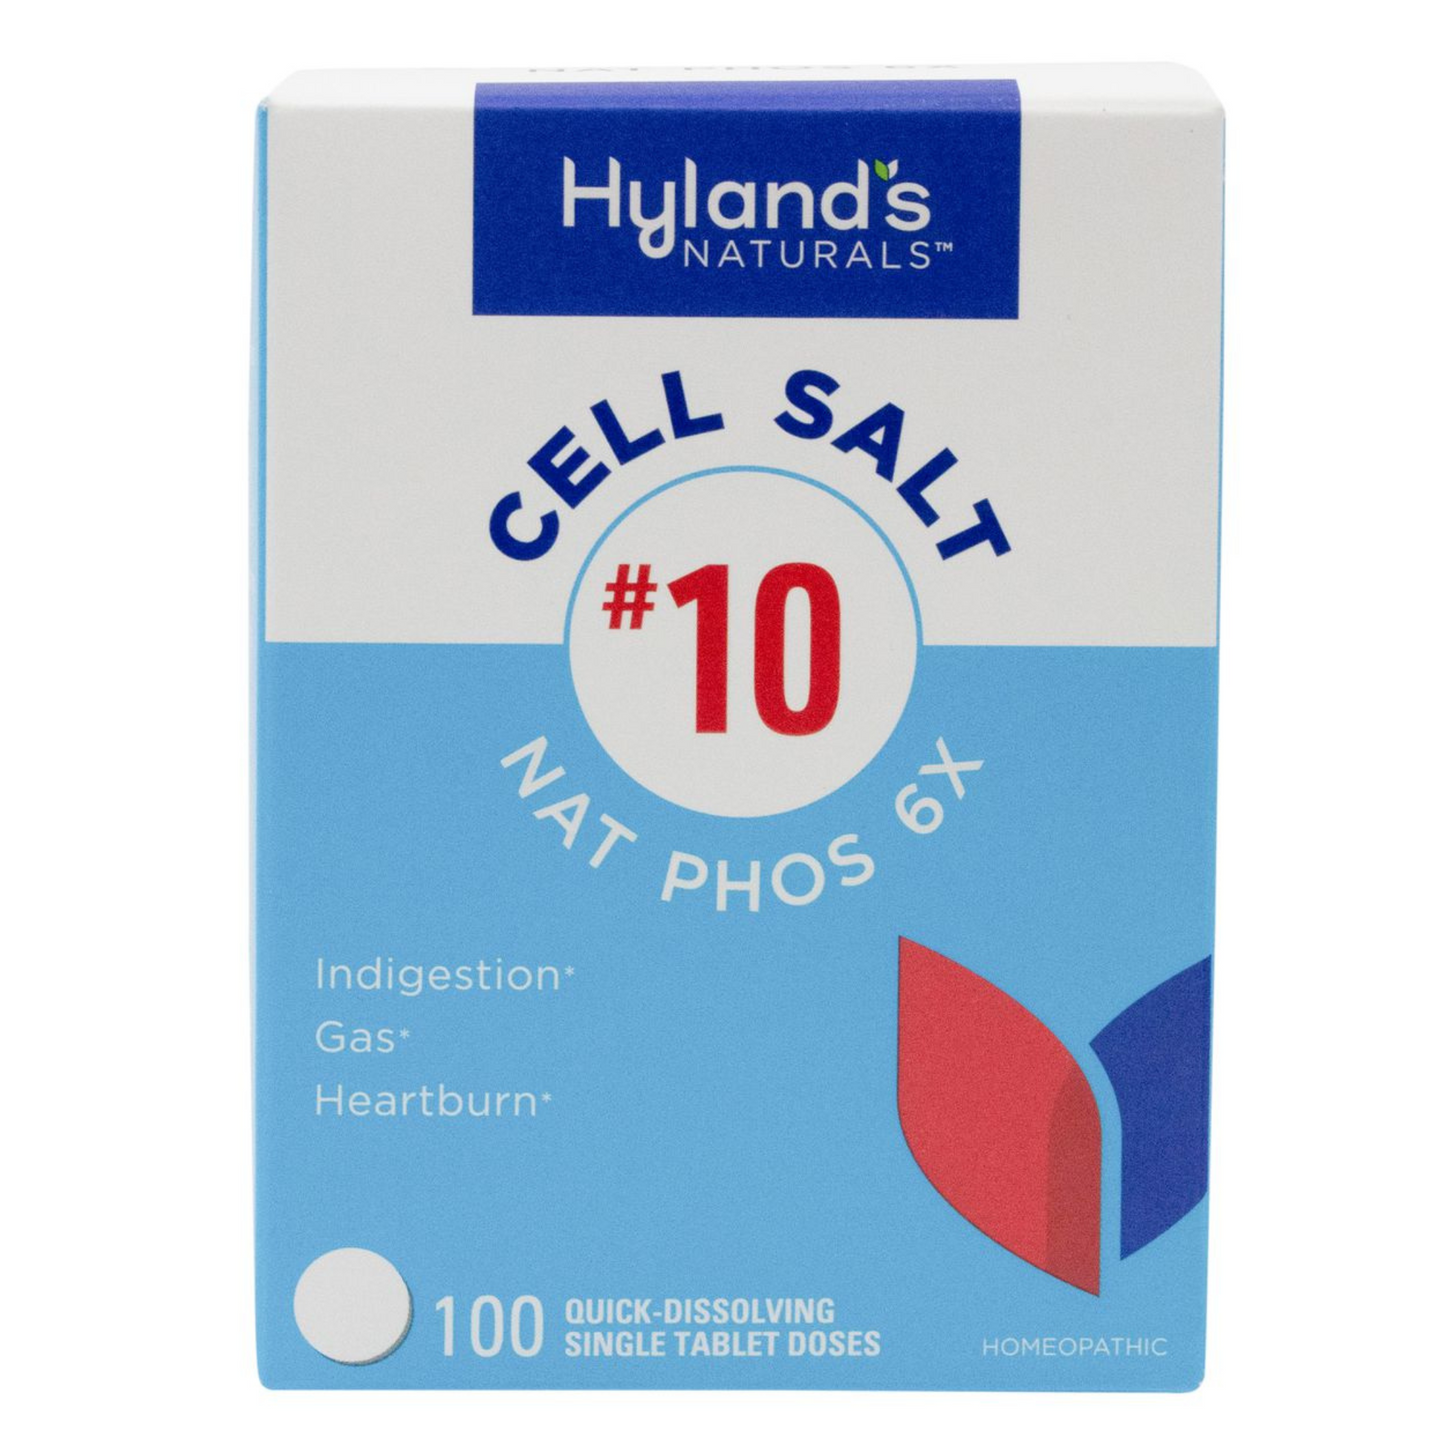 Primary Image of Hyland's Cell Salt Nat Phos 6x Tablets (100 count)